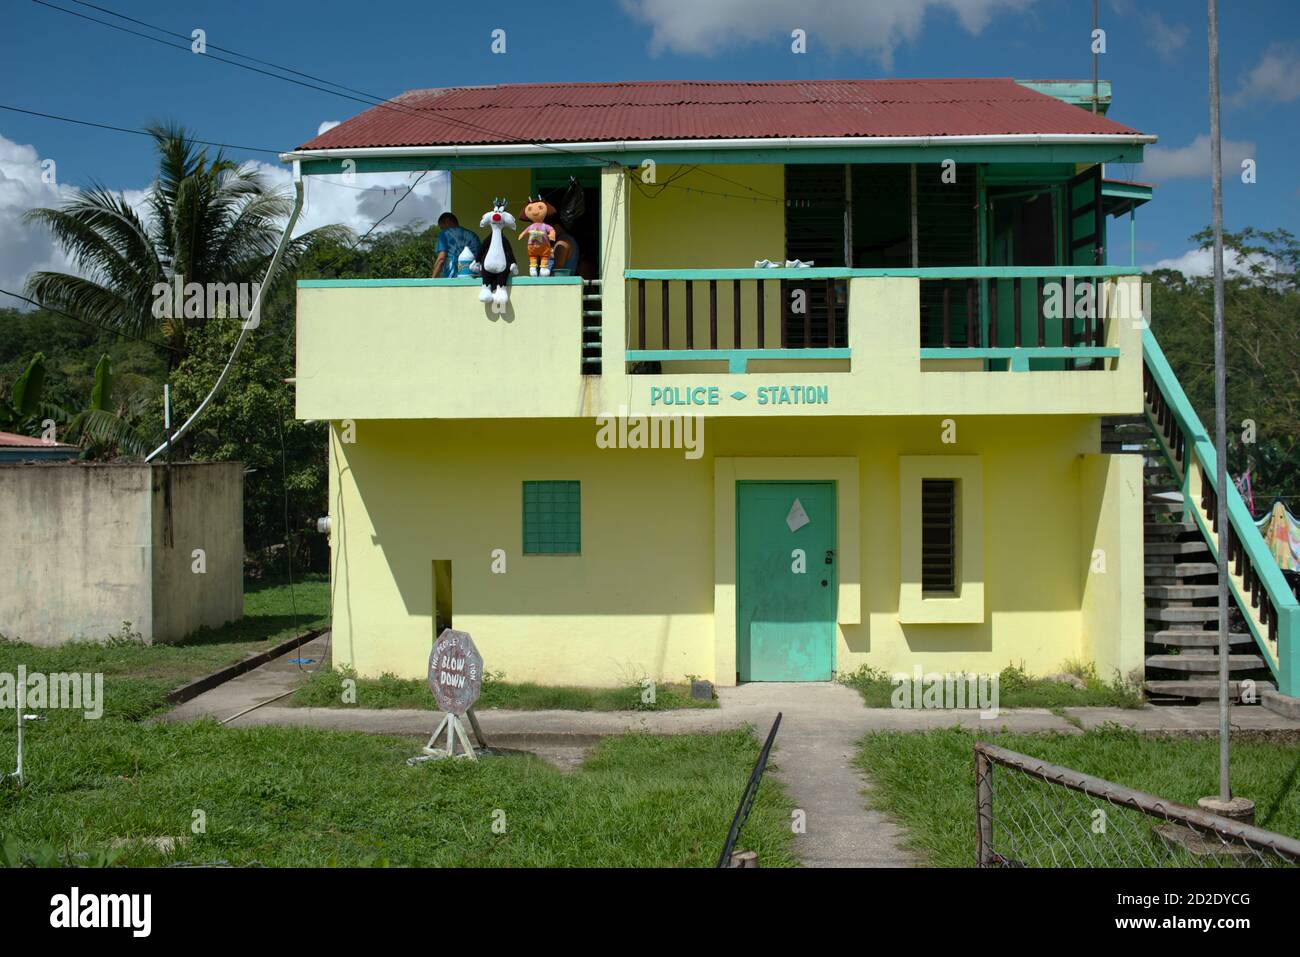 The police station in the small Yucatecan Maya community of San Jose Succotz, Cayo District, Belize. Stock Photo